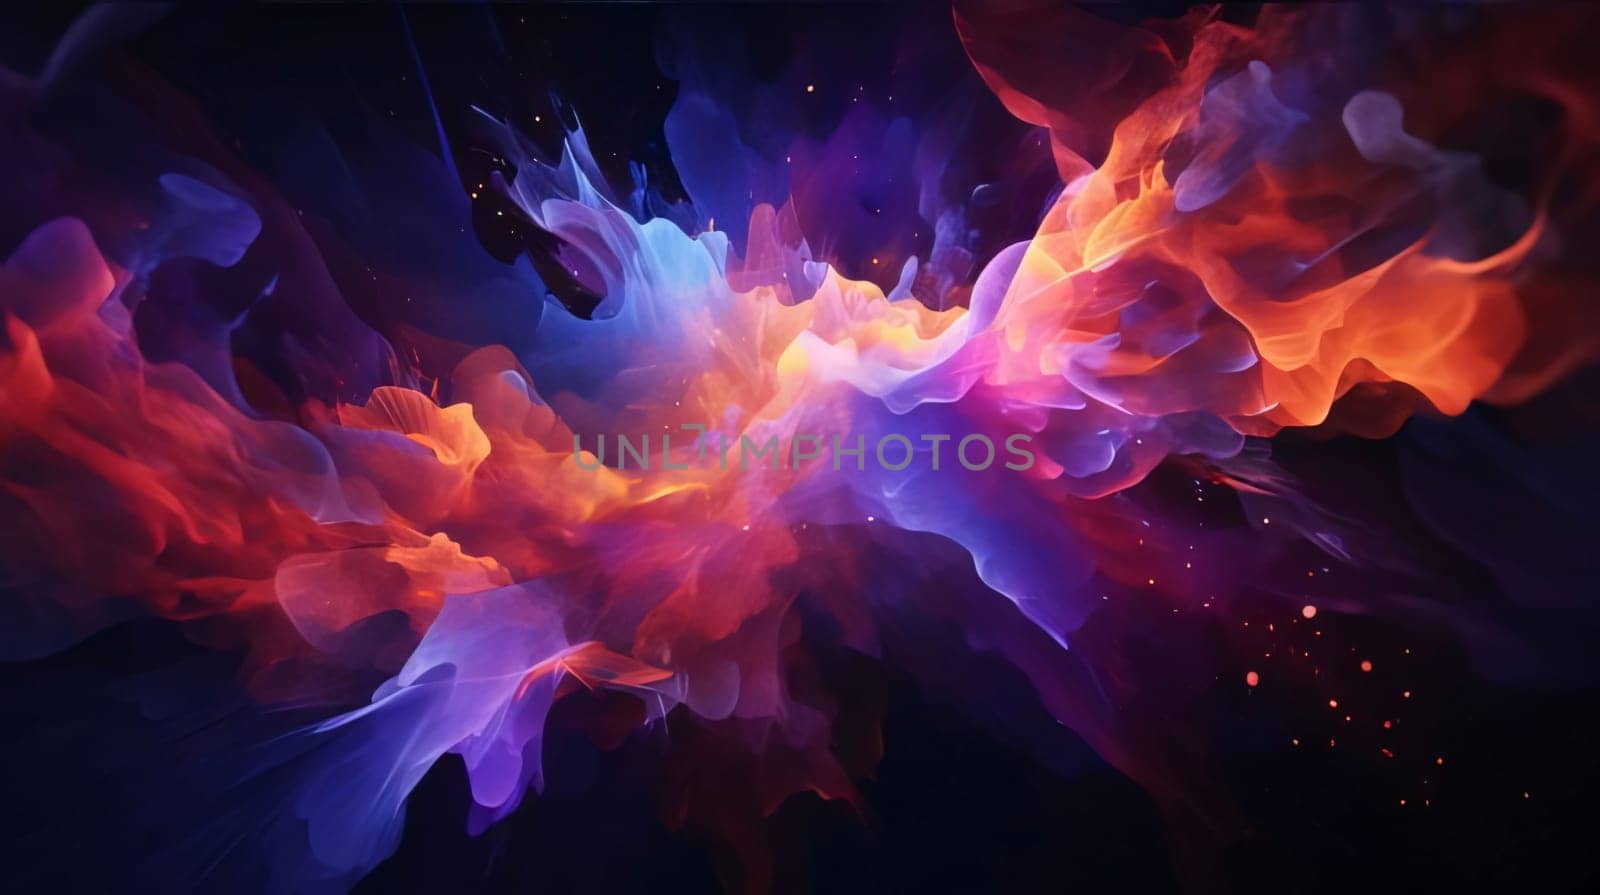 Abstract background design: Abstract background with colorful smoke. Fantasy fractal texture. Digital art. 3D rendering.